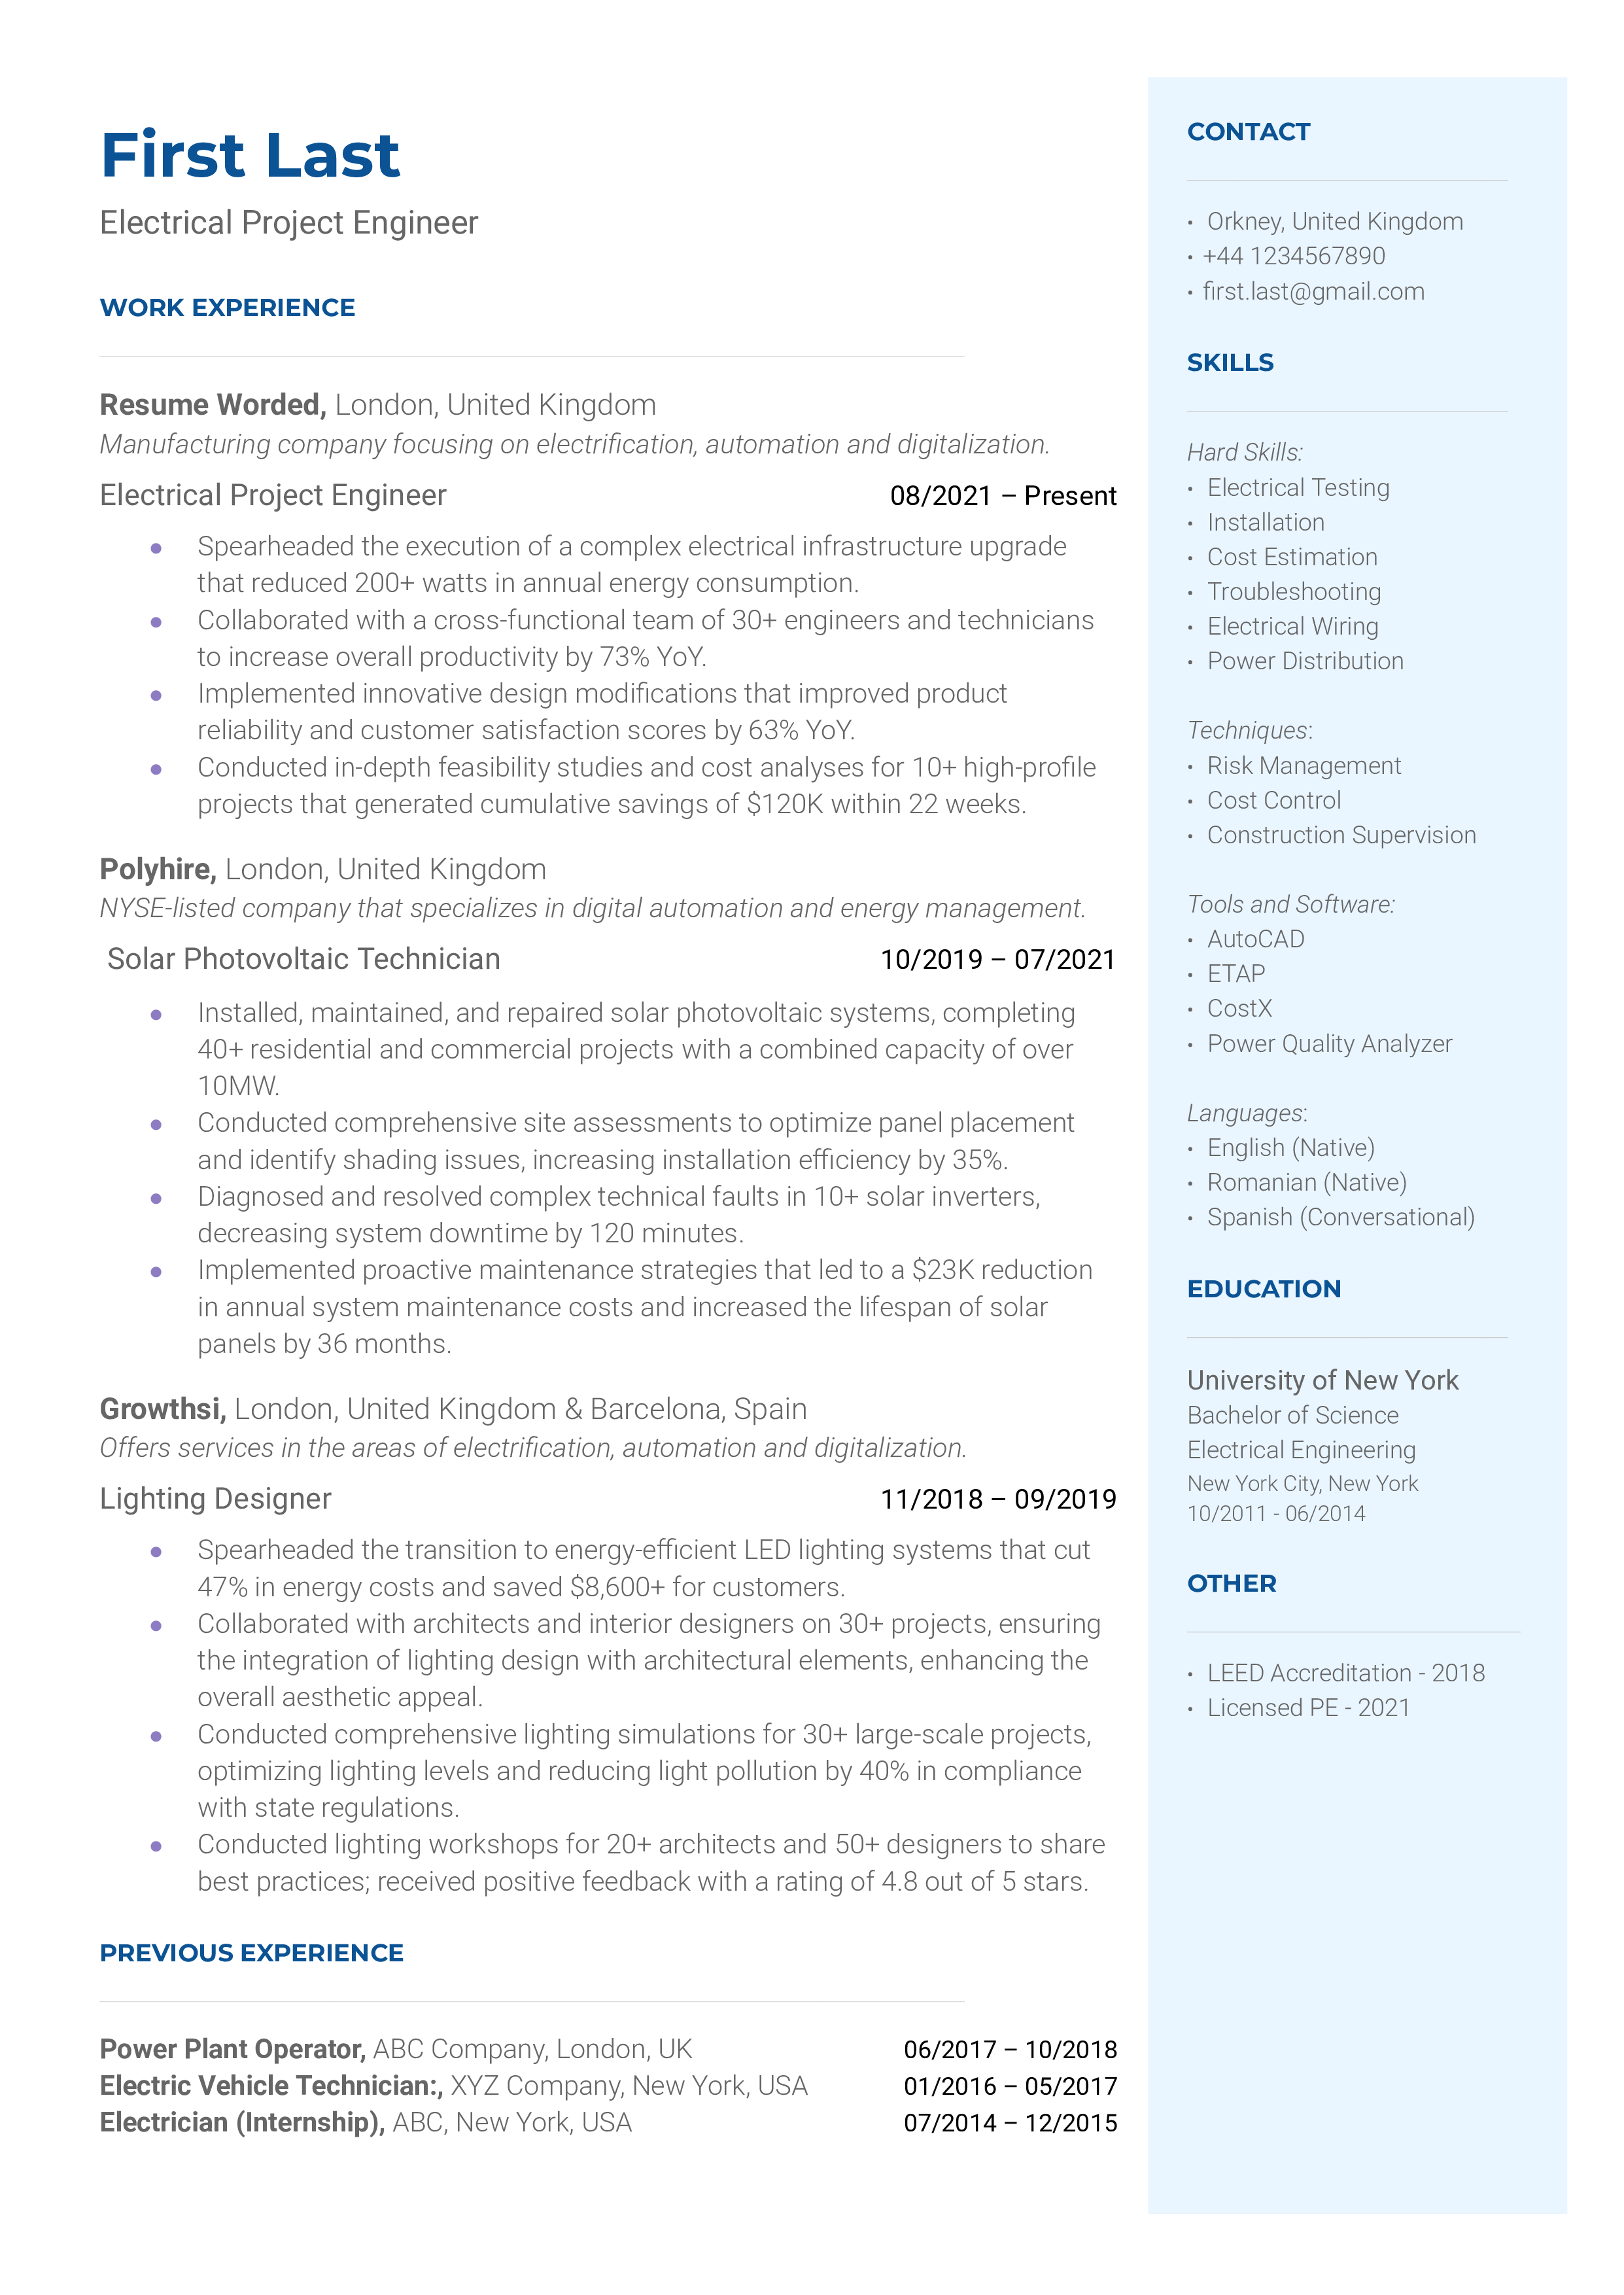 An Electrical Project Engineer's resume highlighting green technology expertise and remote project management experience.